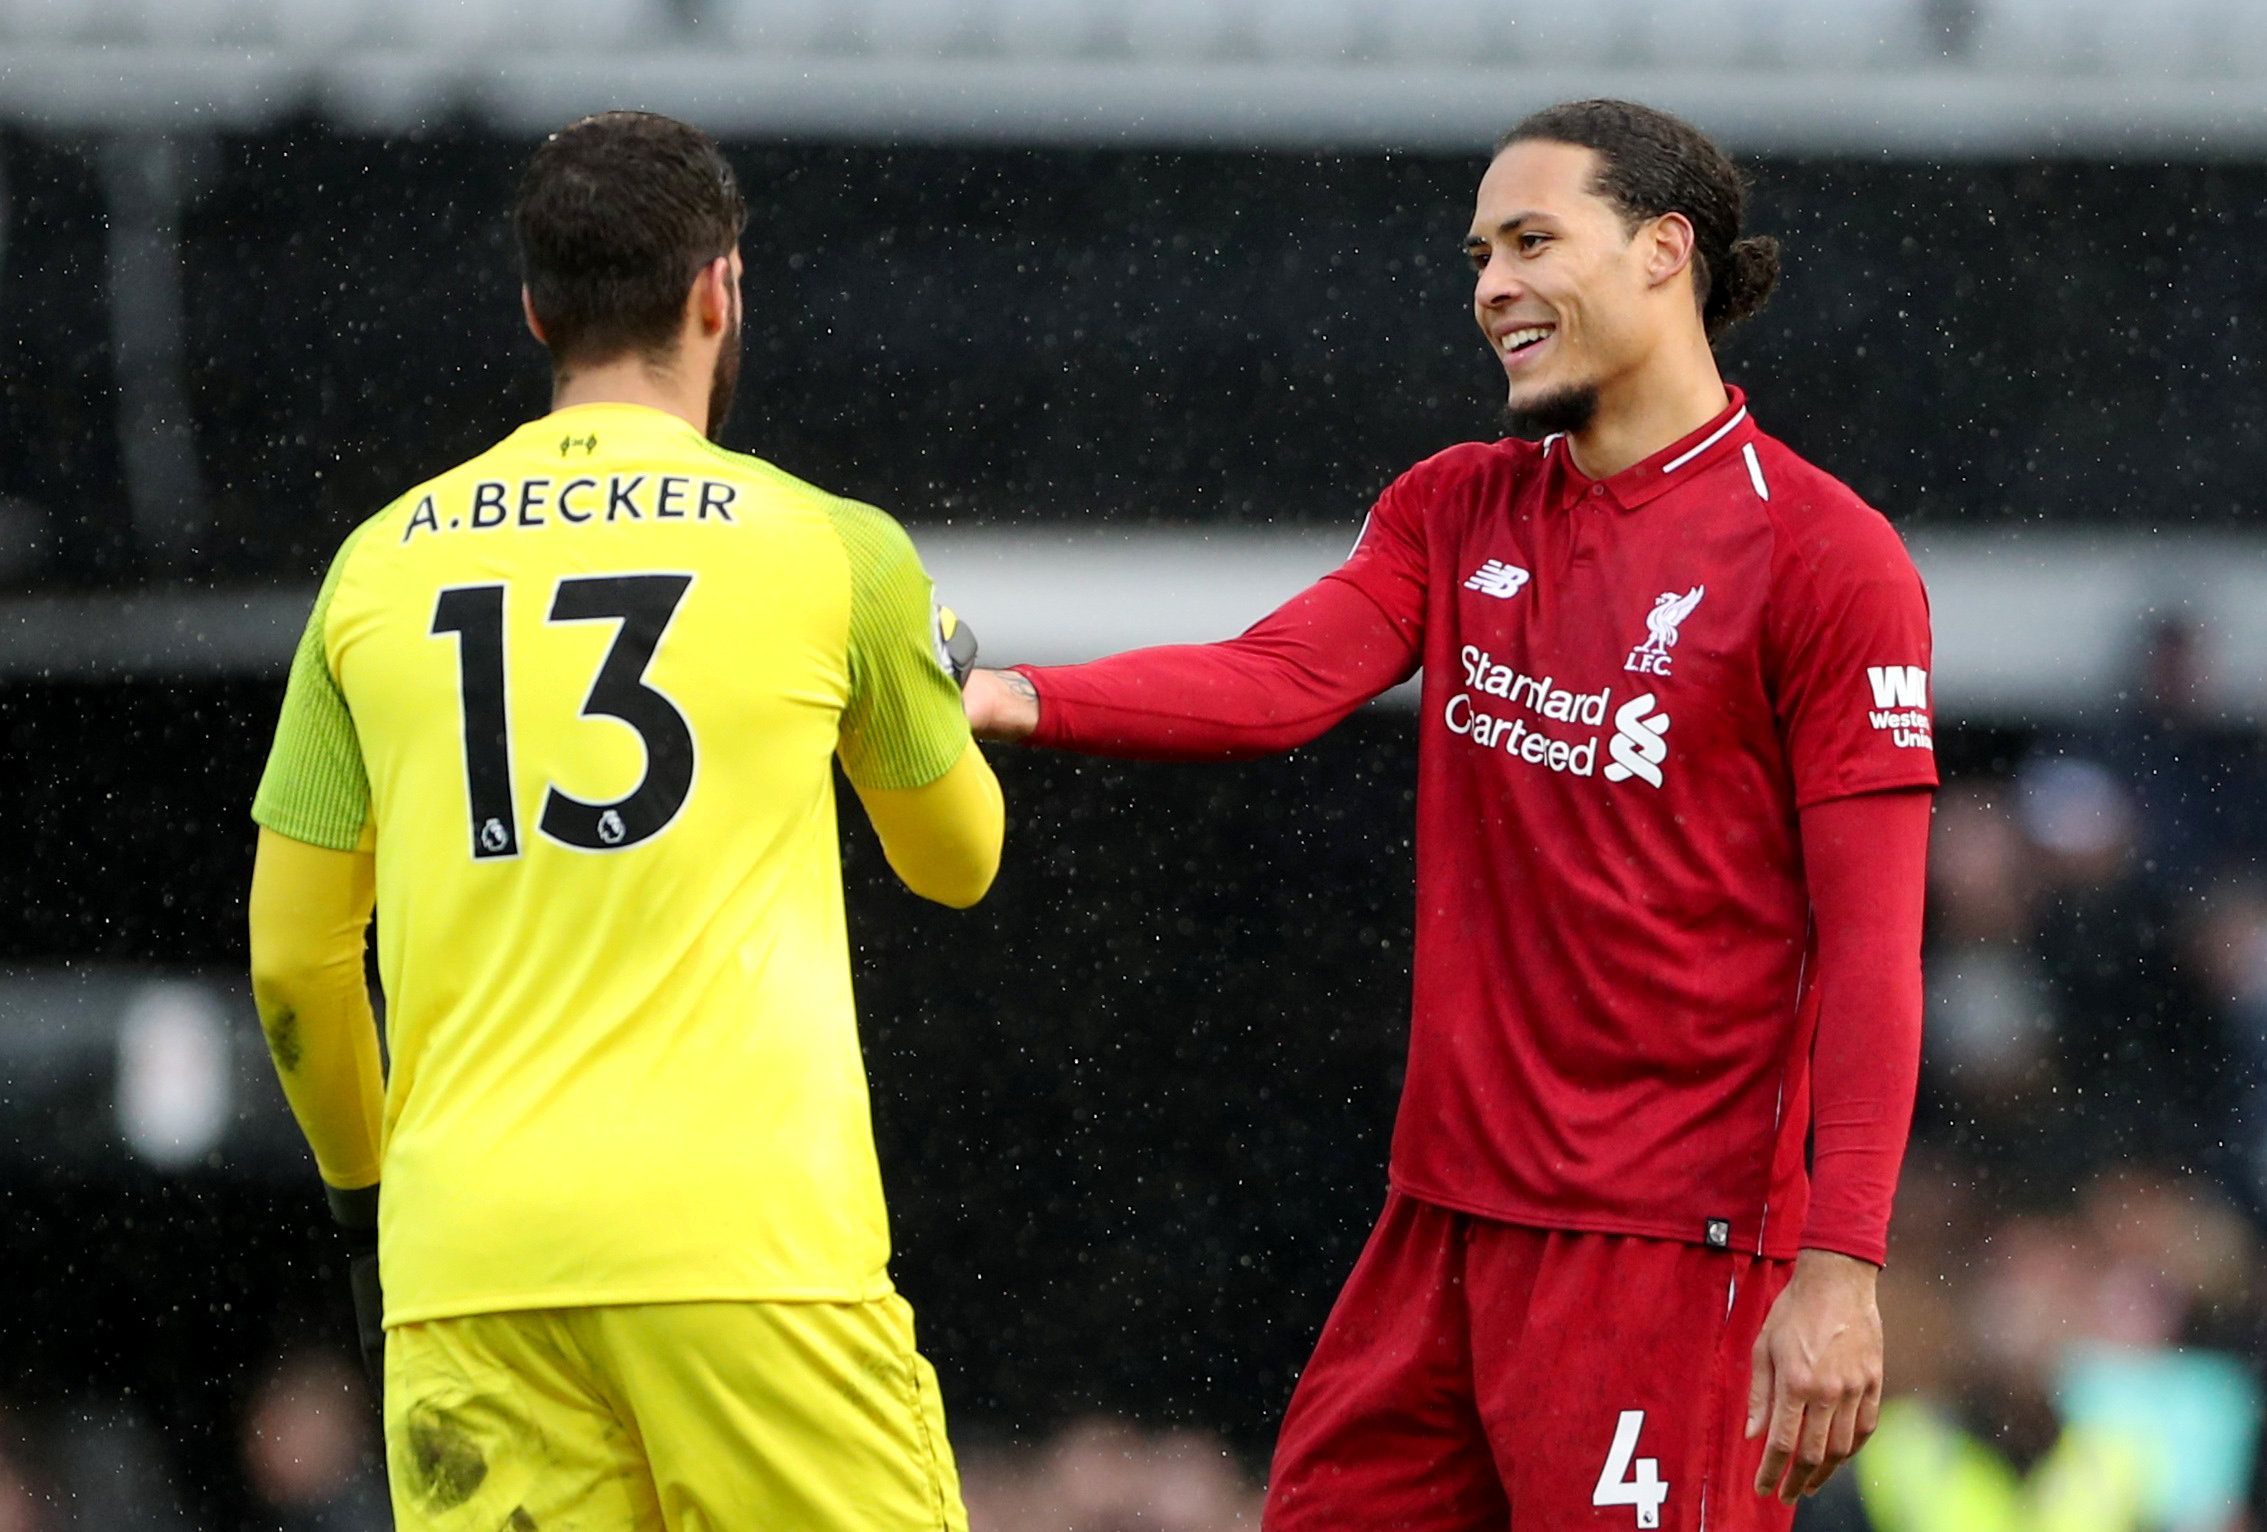 Soccer Football - Premier League - Fulham v Liverpool - Craven Cottage, London, Britain - March 17, 2019  Liverpool's Alisson and Virgil van Dijk celebrate after the match                   REUTERS/Hannah McKay  EDITORIAL USE ONLY. No use with unauthorized audio, video, data, fixture lists, club/league logos or 